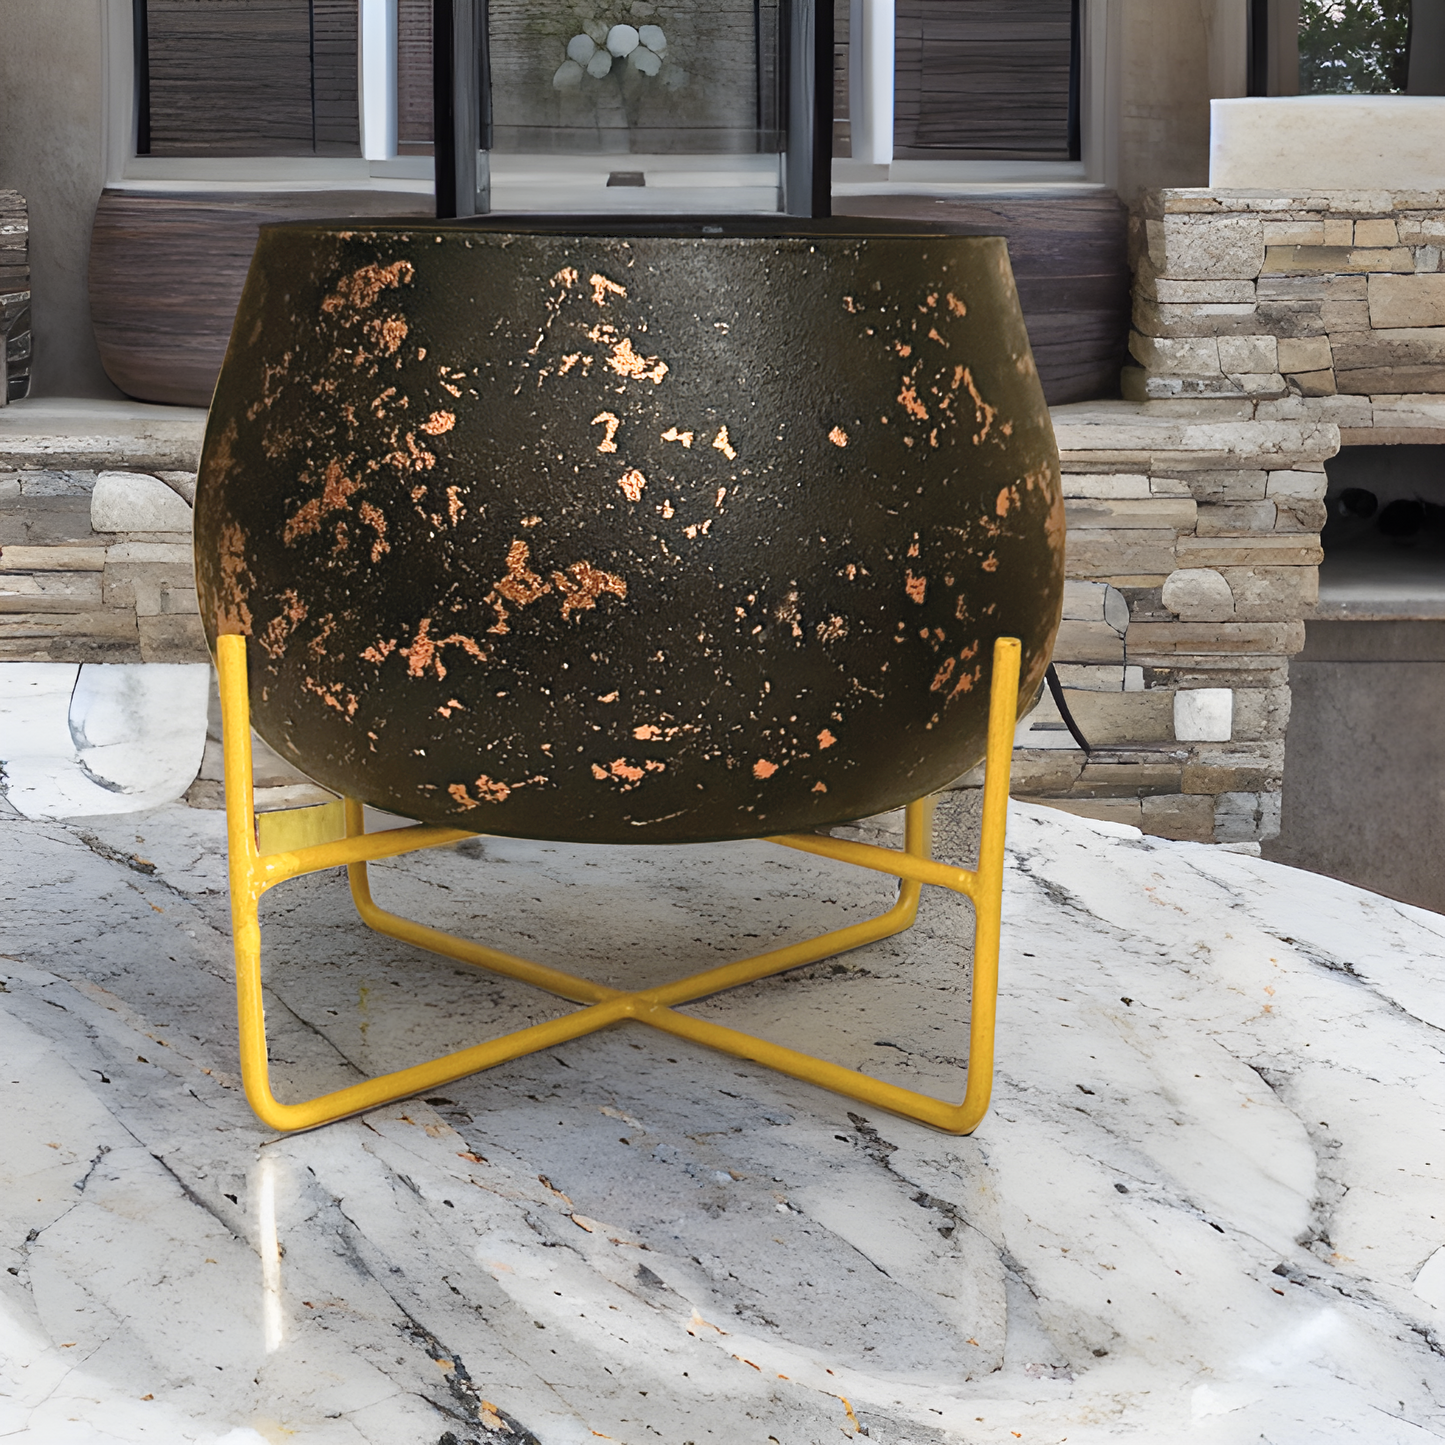 Big Powder coated Metal Pot with Stand | Black with Golden finish